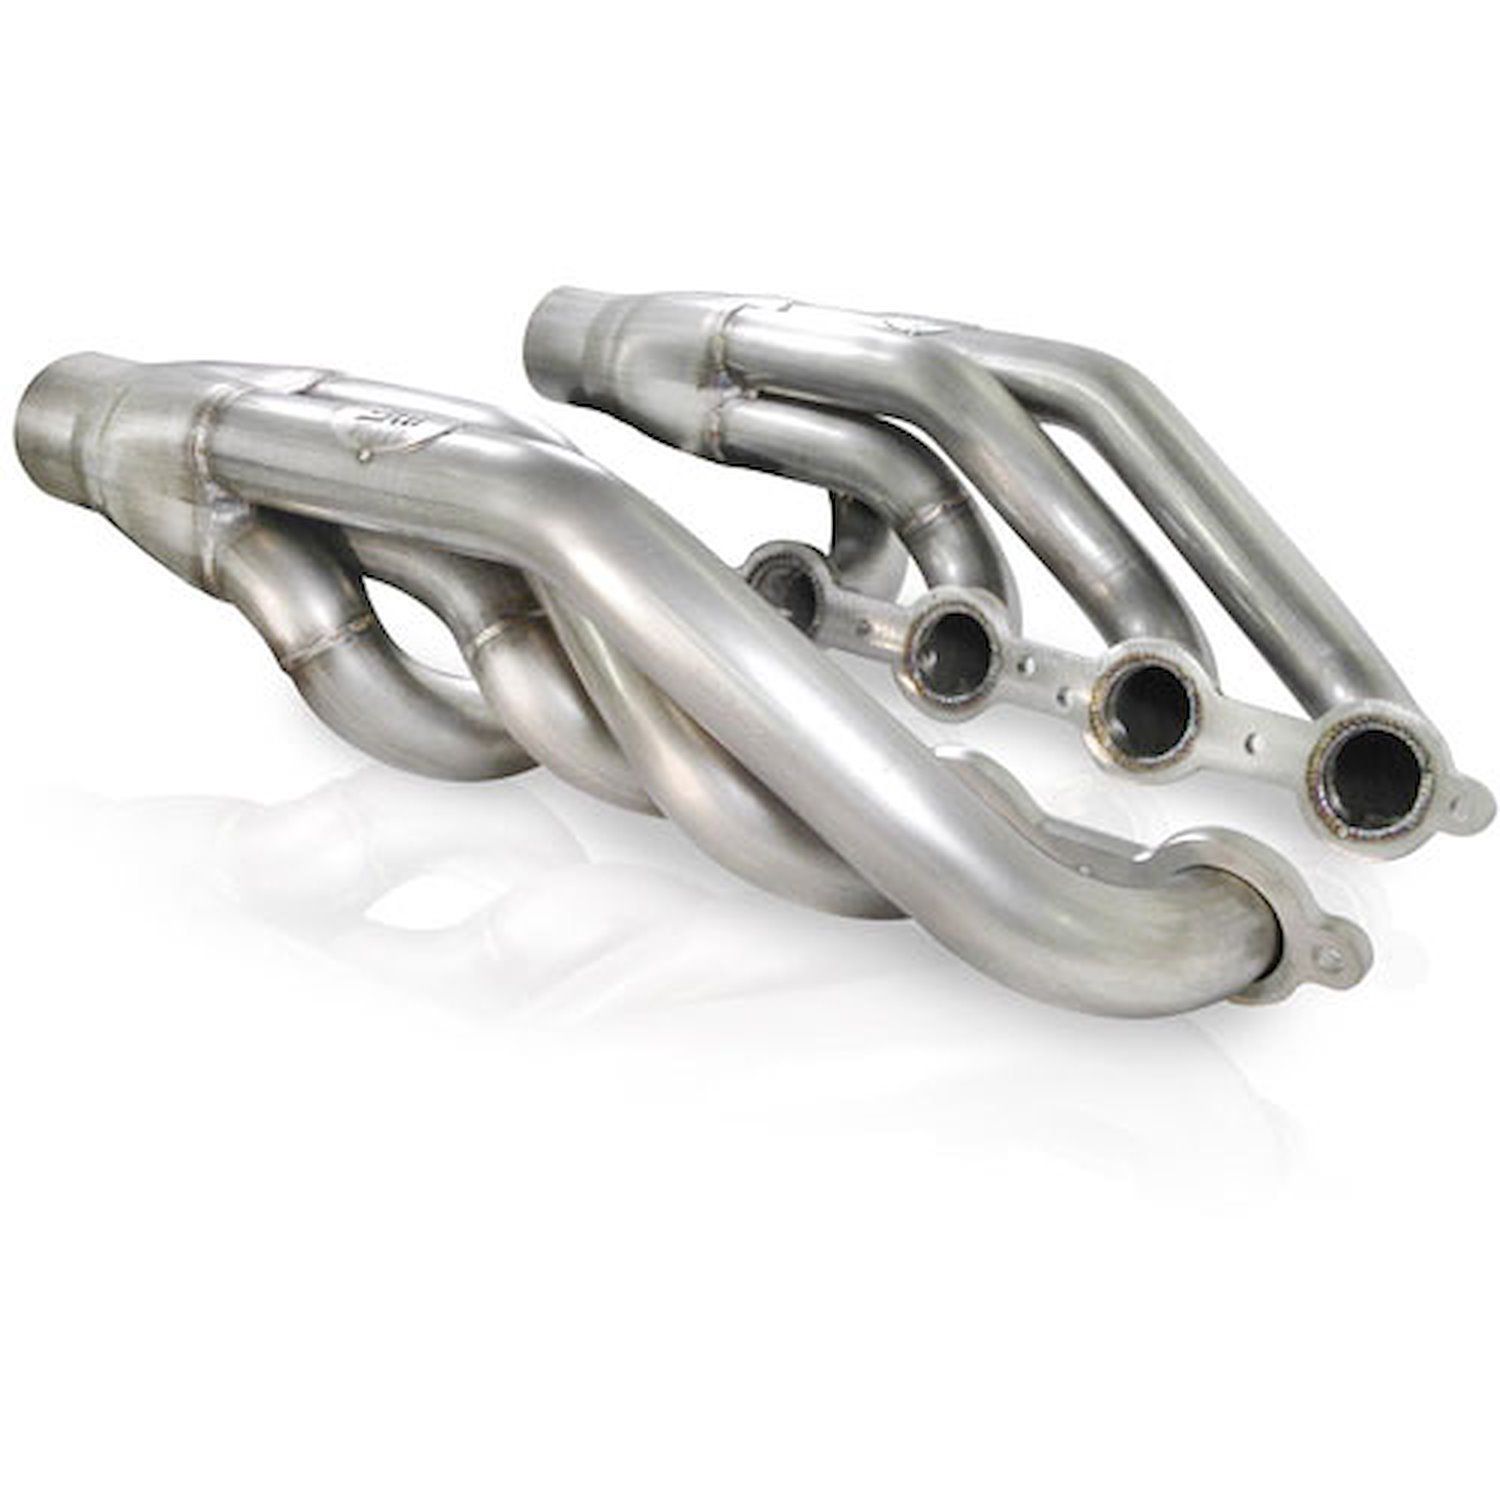 Up and Forward Turbo Headers LS1-LSX Series Chevy